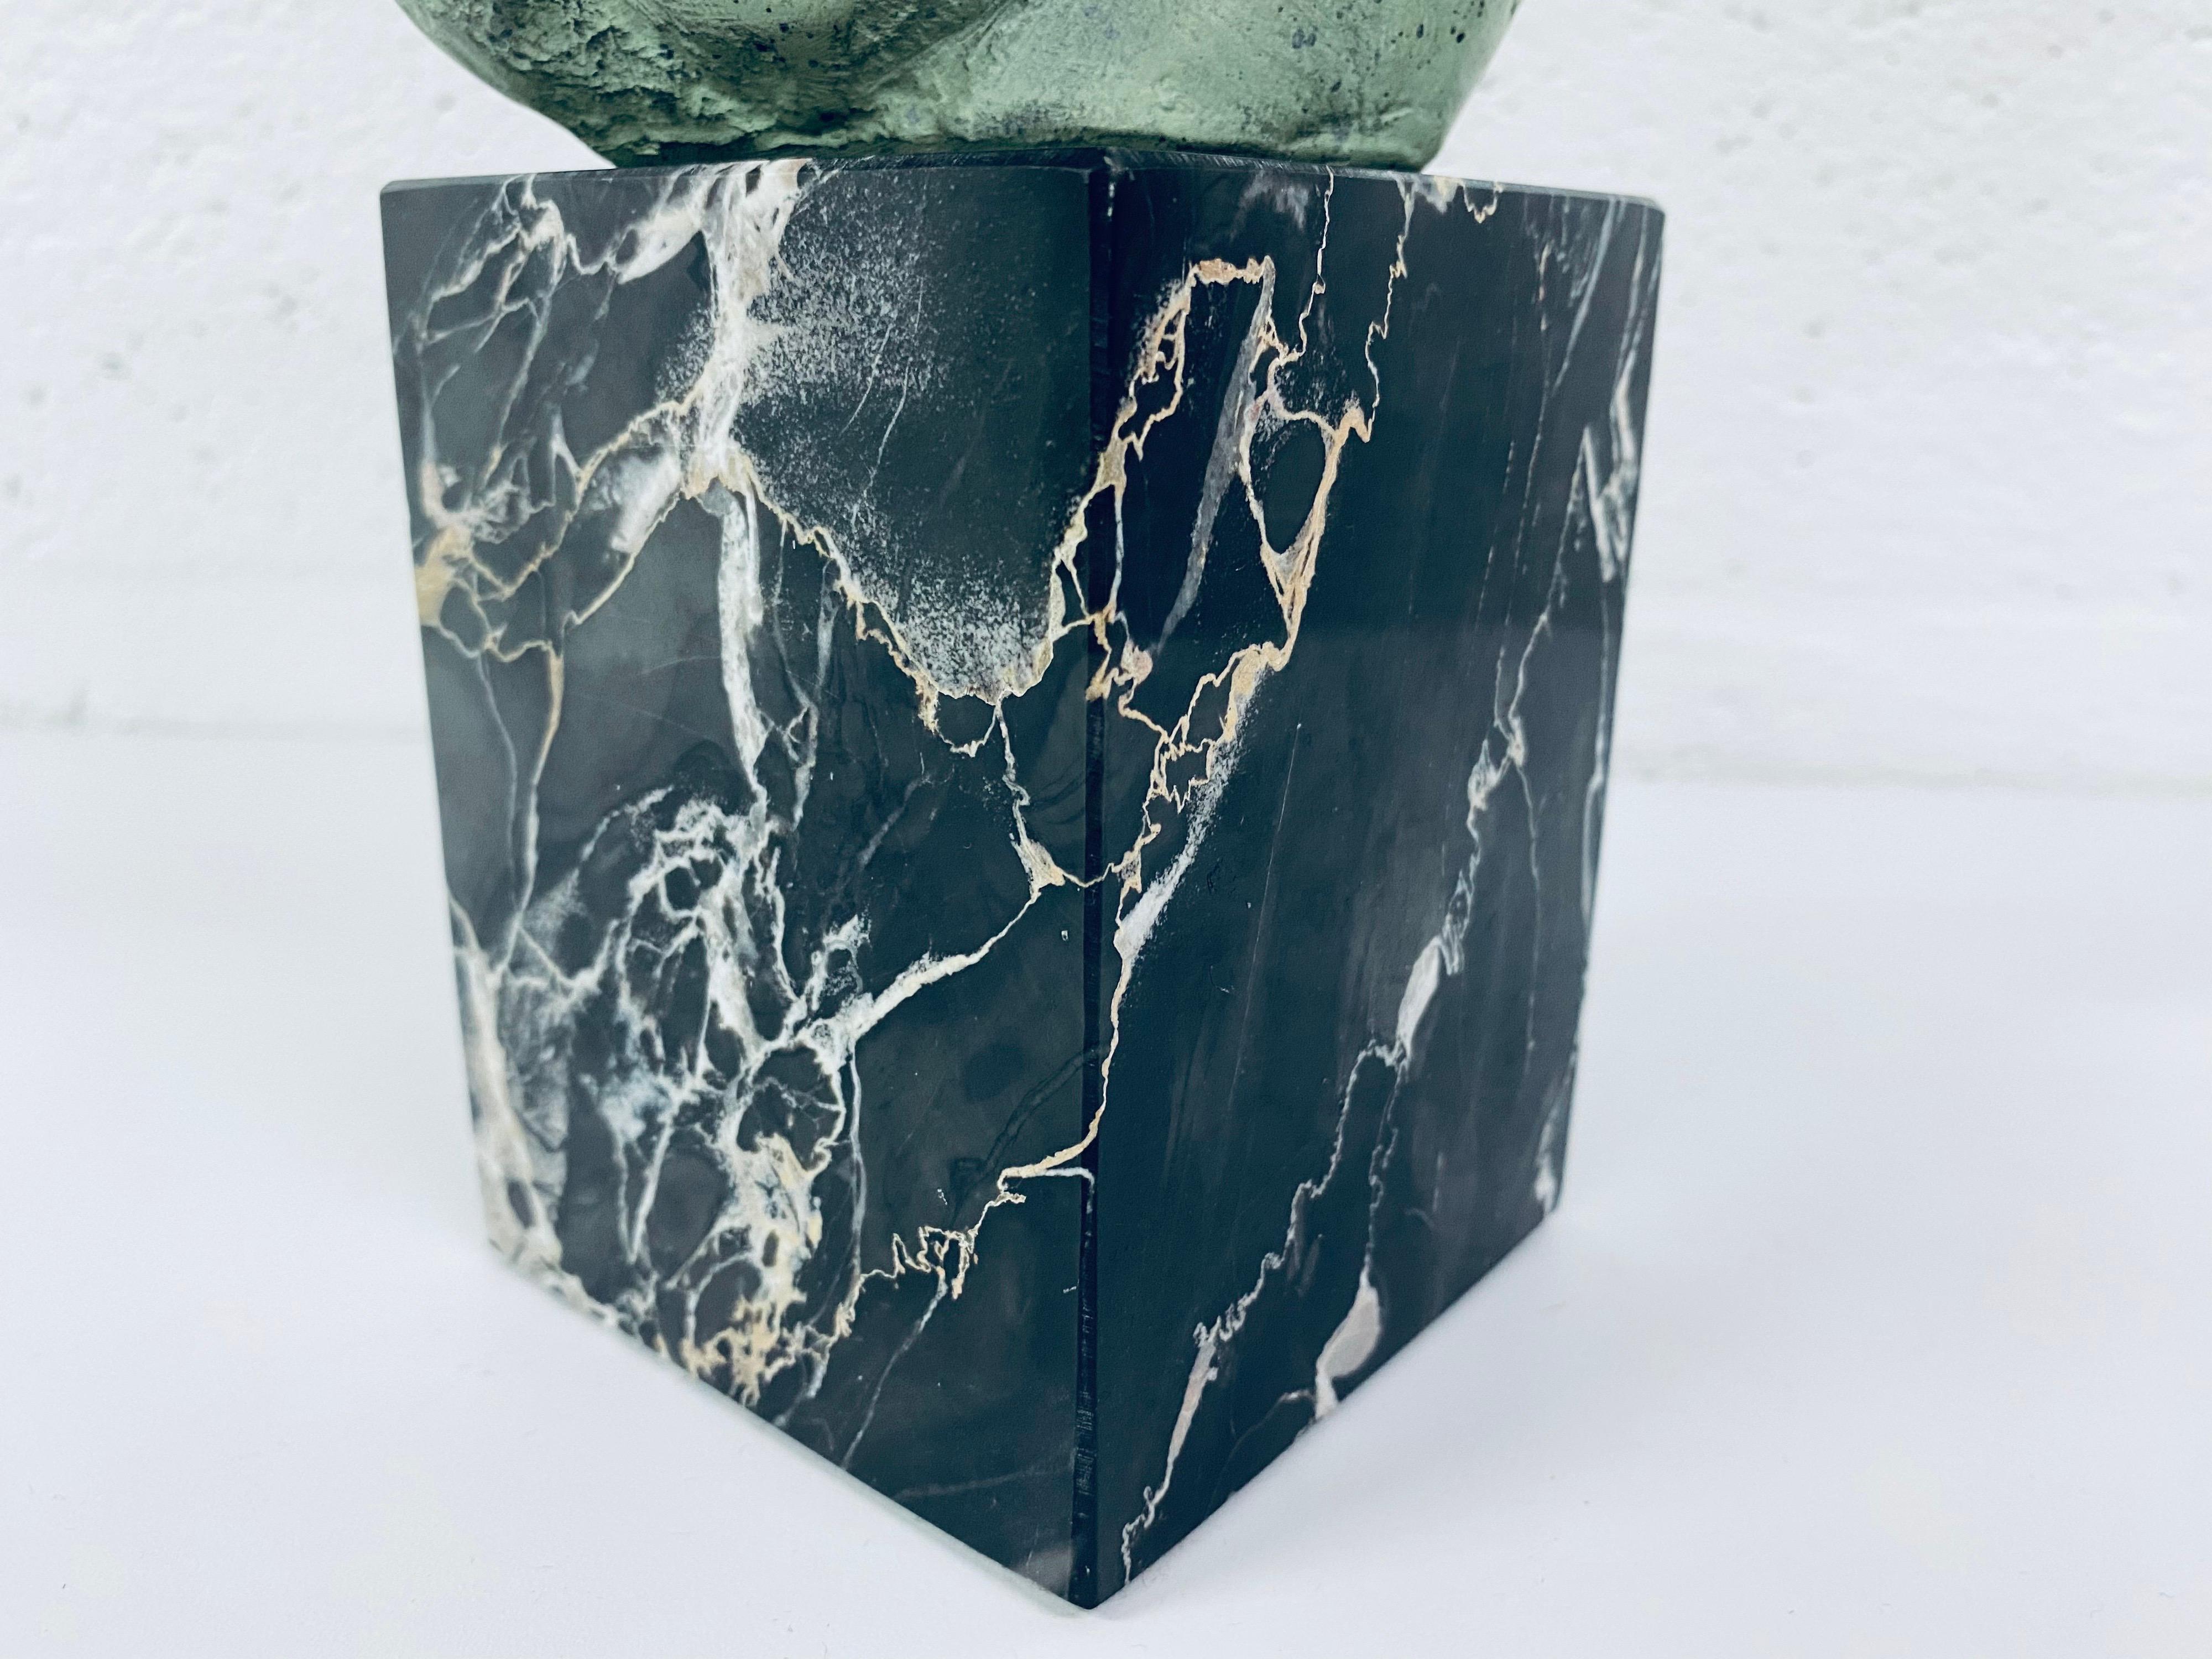 Late 20th Century Midcentury Sculpted Resin Sculpture on Marble Base by Peggy March